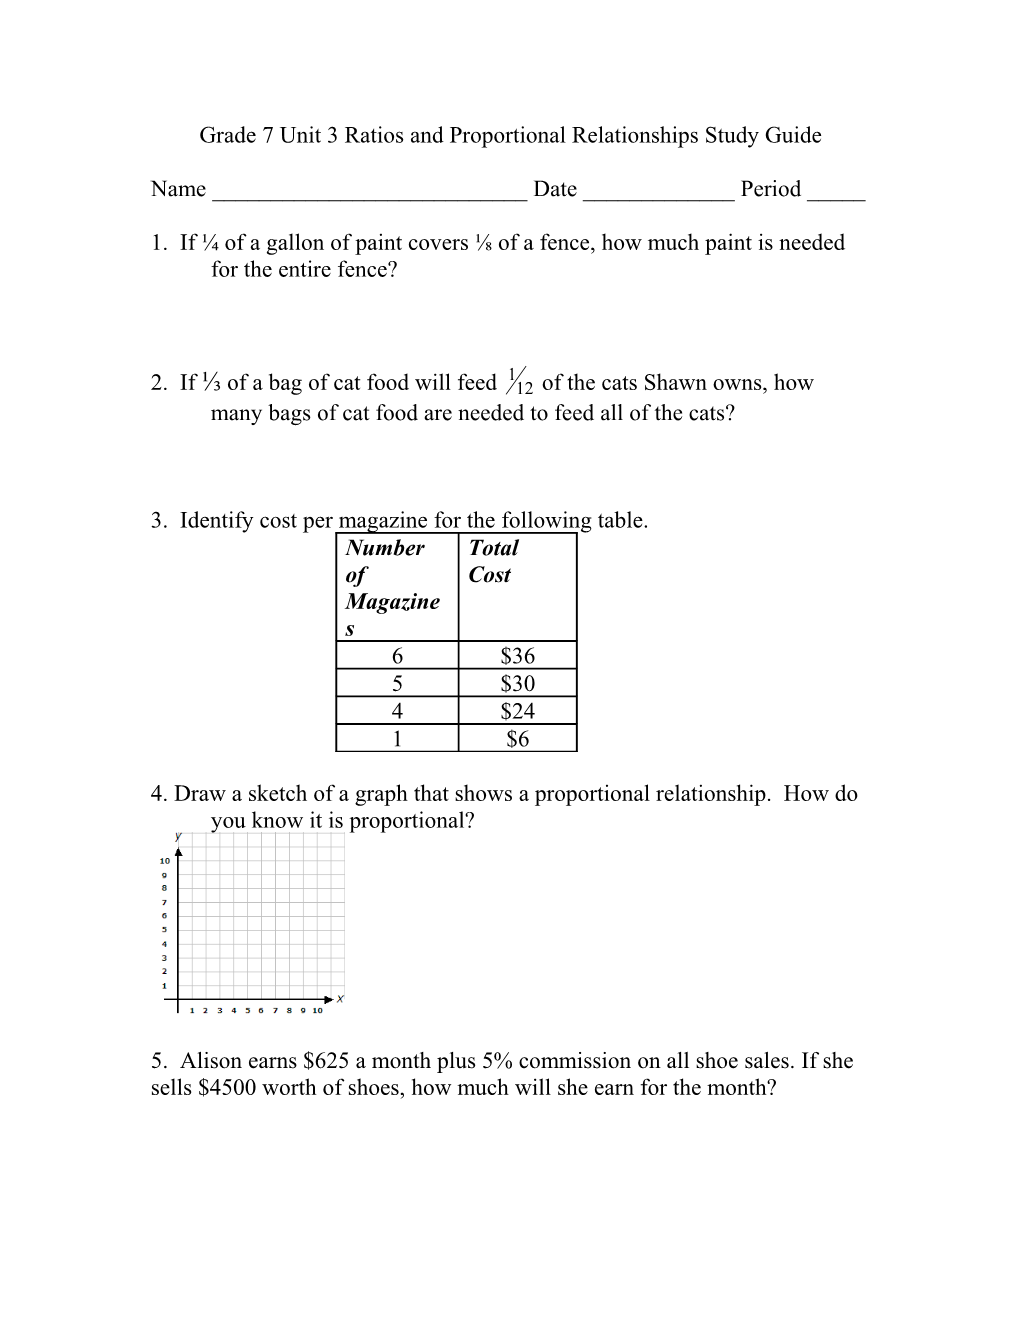 Unit 3 Ratios and Proportional Relationships Study Guide